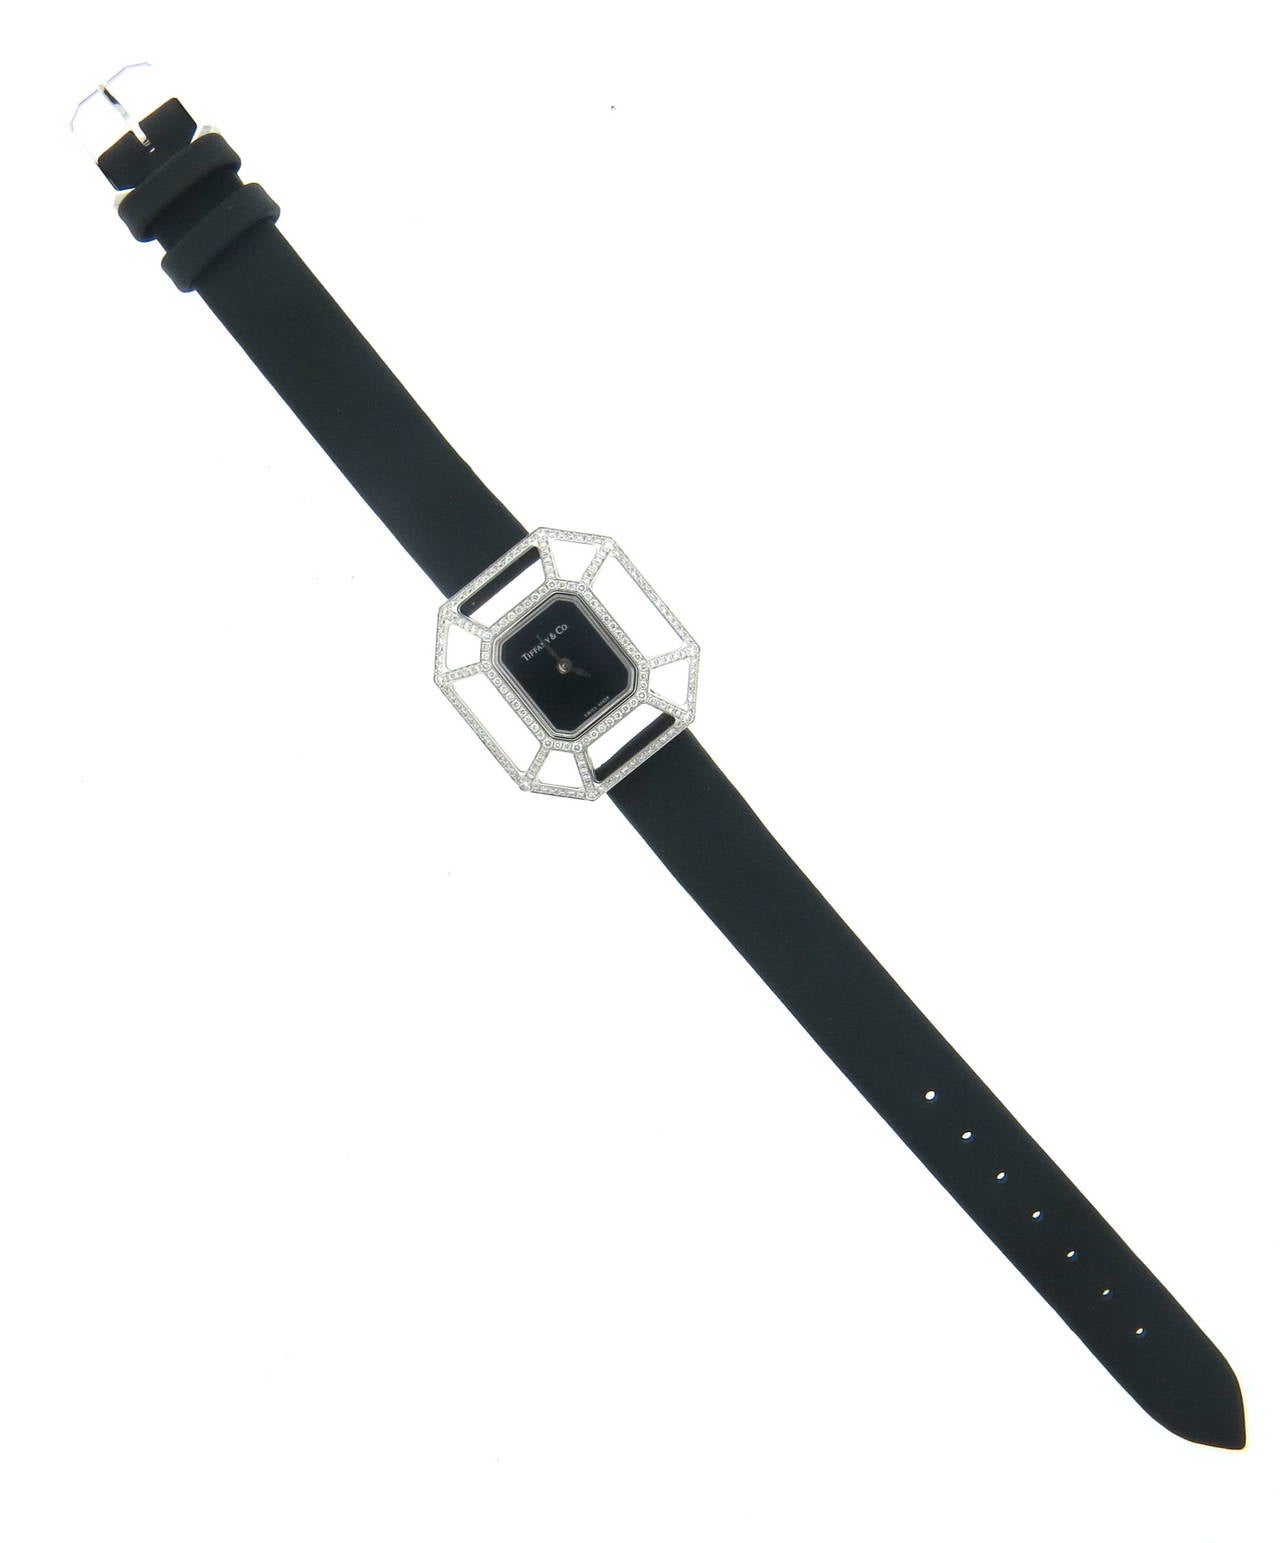 18k white gold watch, designed by Paloma Picasso for Tiffany & Co, open pyzzle case is decorated with approx. 0.57ctw in diamonds, measuring 25mmx  27mm, featuring black dial, signed Tiffany & Co. Quartz movement. Black satin leather band is 7 1/8